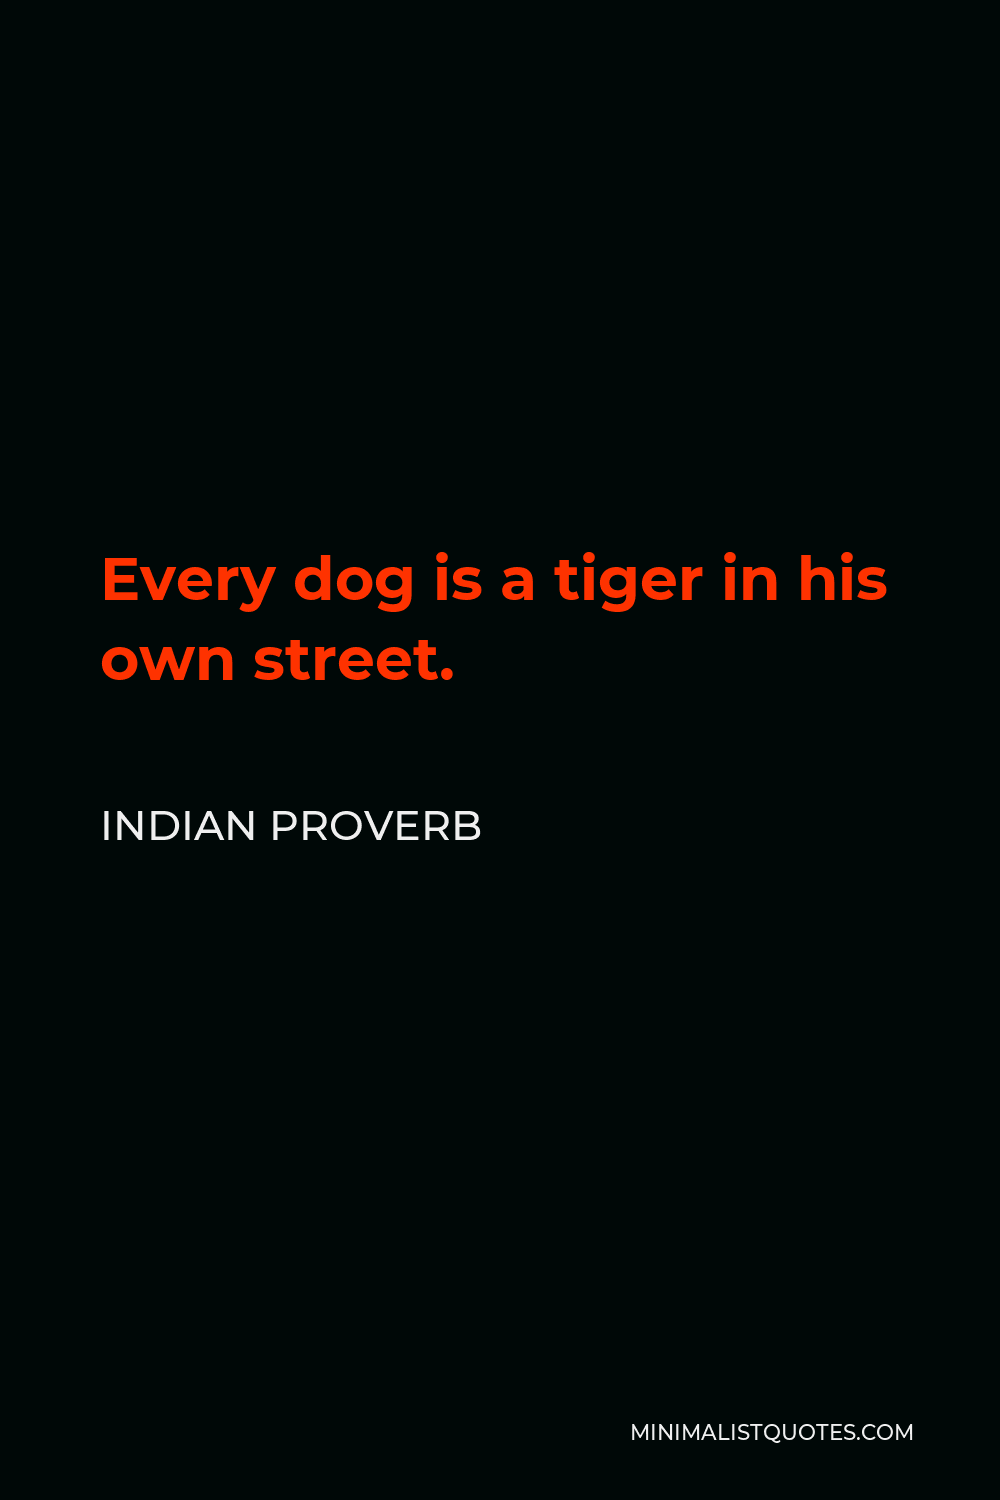 Indian Proverb Quote - Every dog is a tiger in his own street.